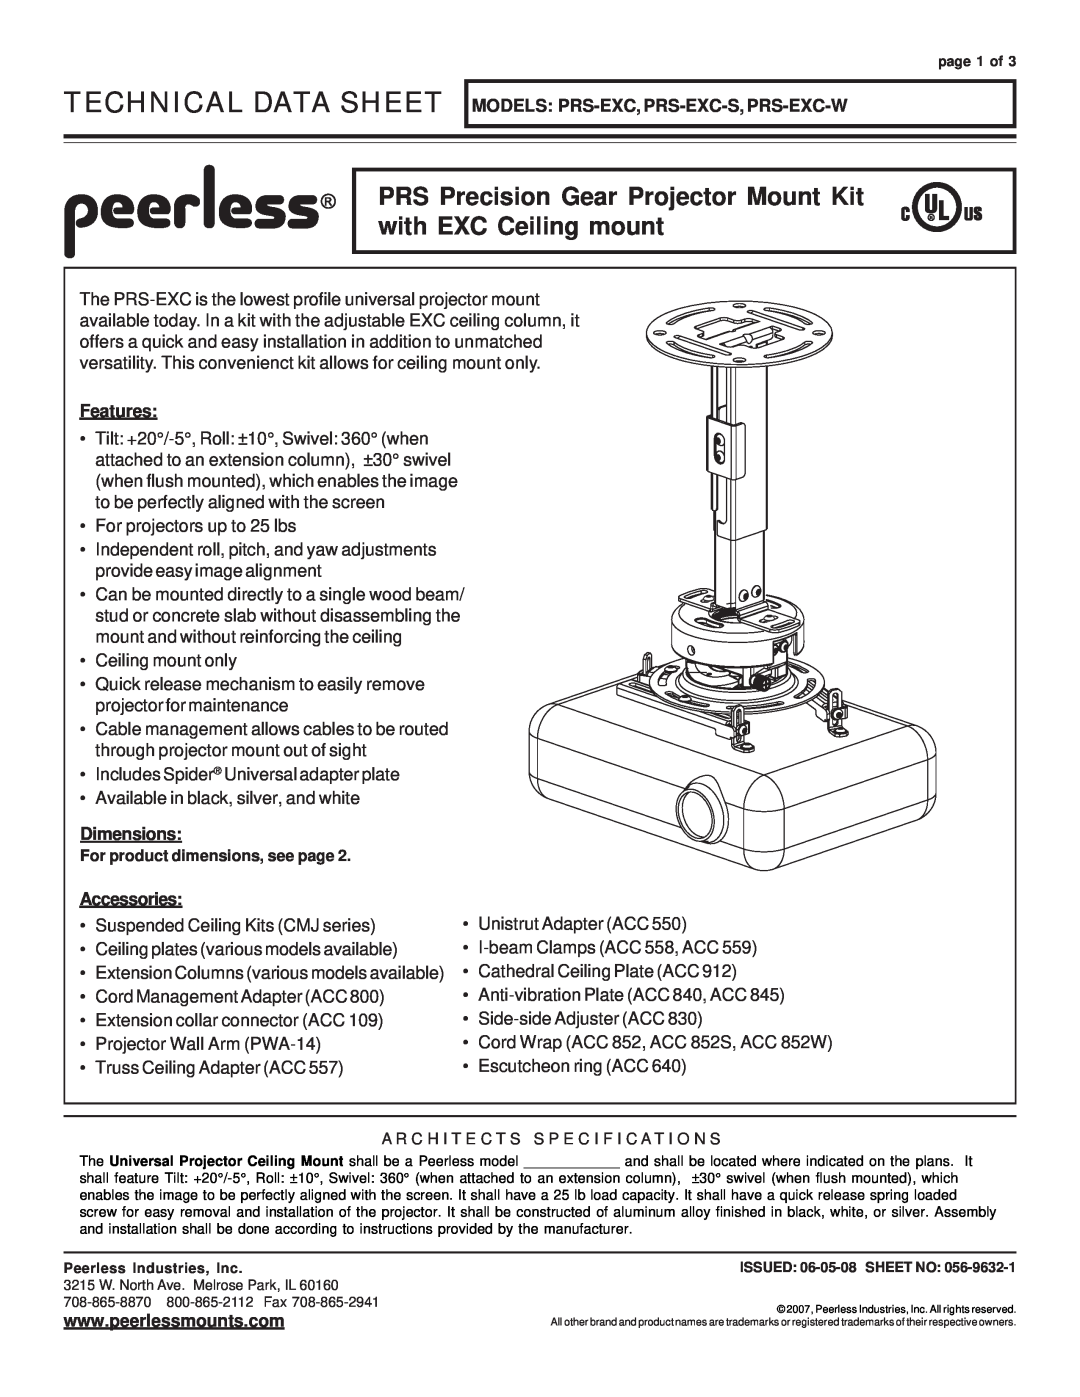 Peerless Industries PRS-EXC-S specifications Technical Data Sheet, Models Prs-Exc, Prs-Exc-S, Prs-Exc-W, Features 